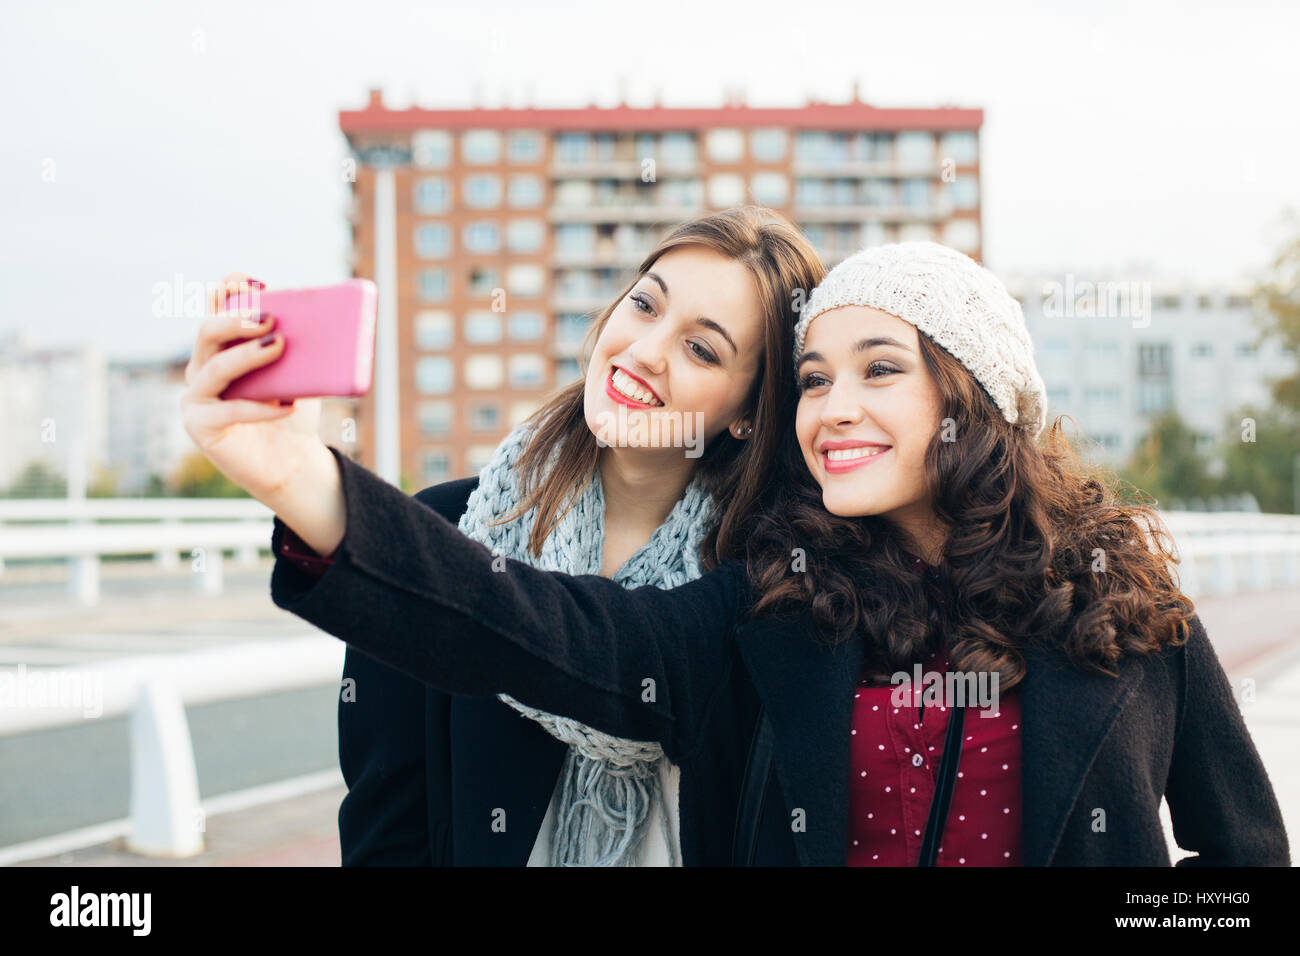 20 Best Friend Poses that are Trending on Social Media Right Now -  Localgrapher